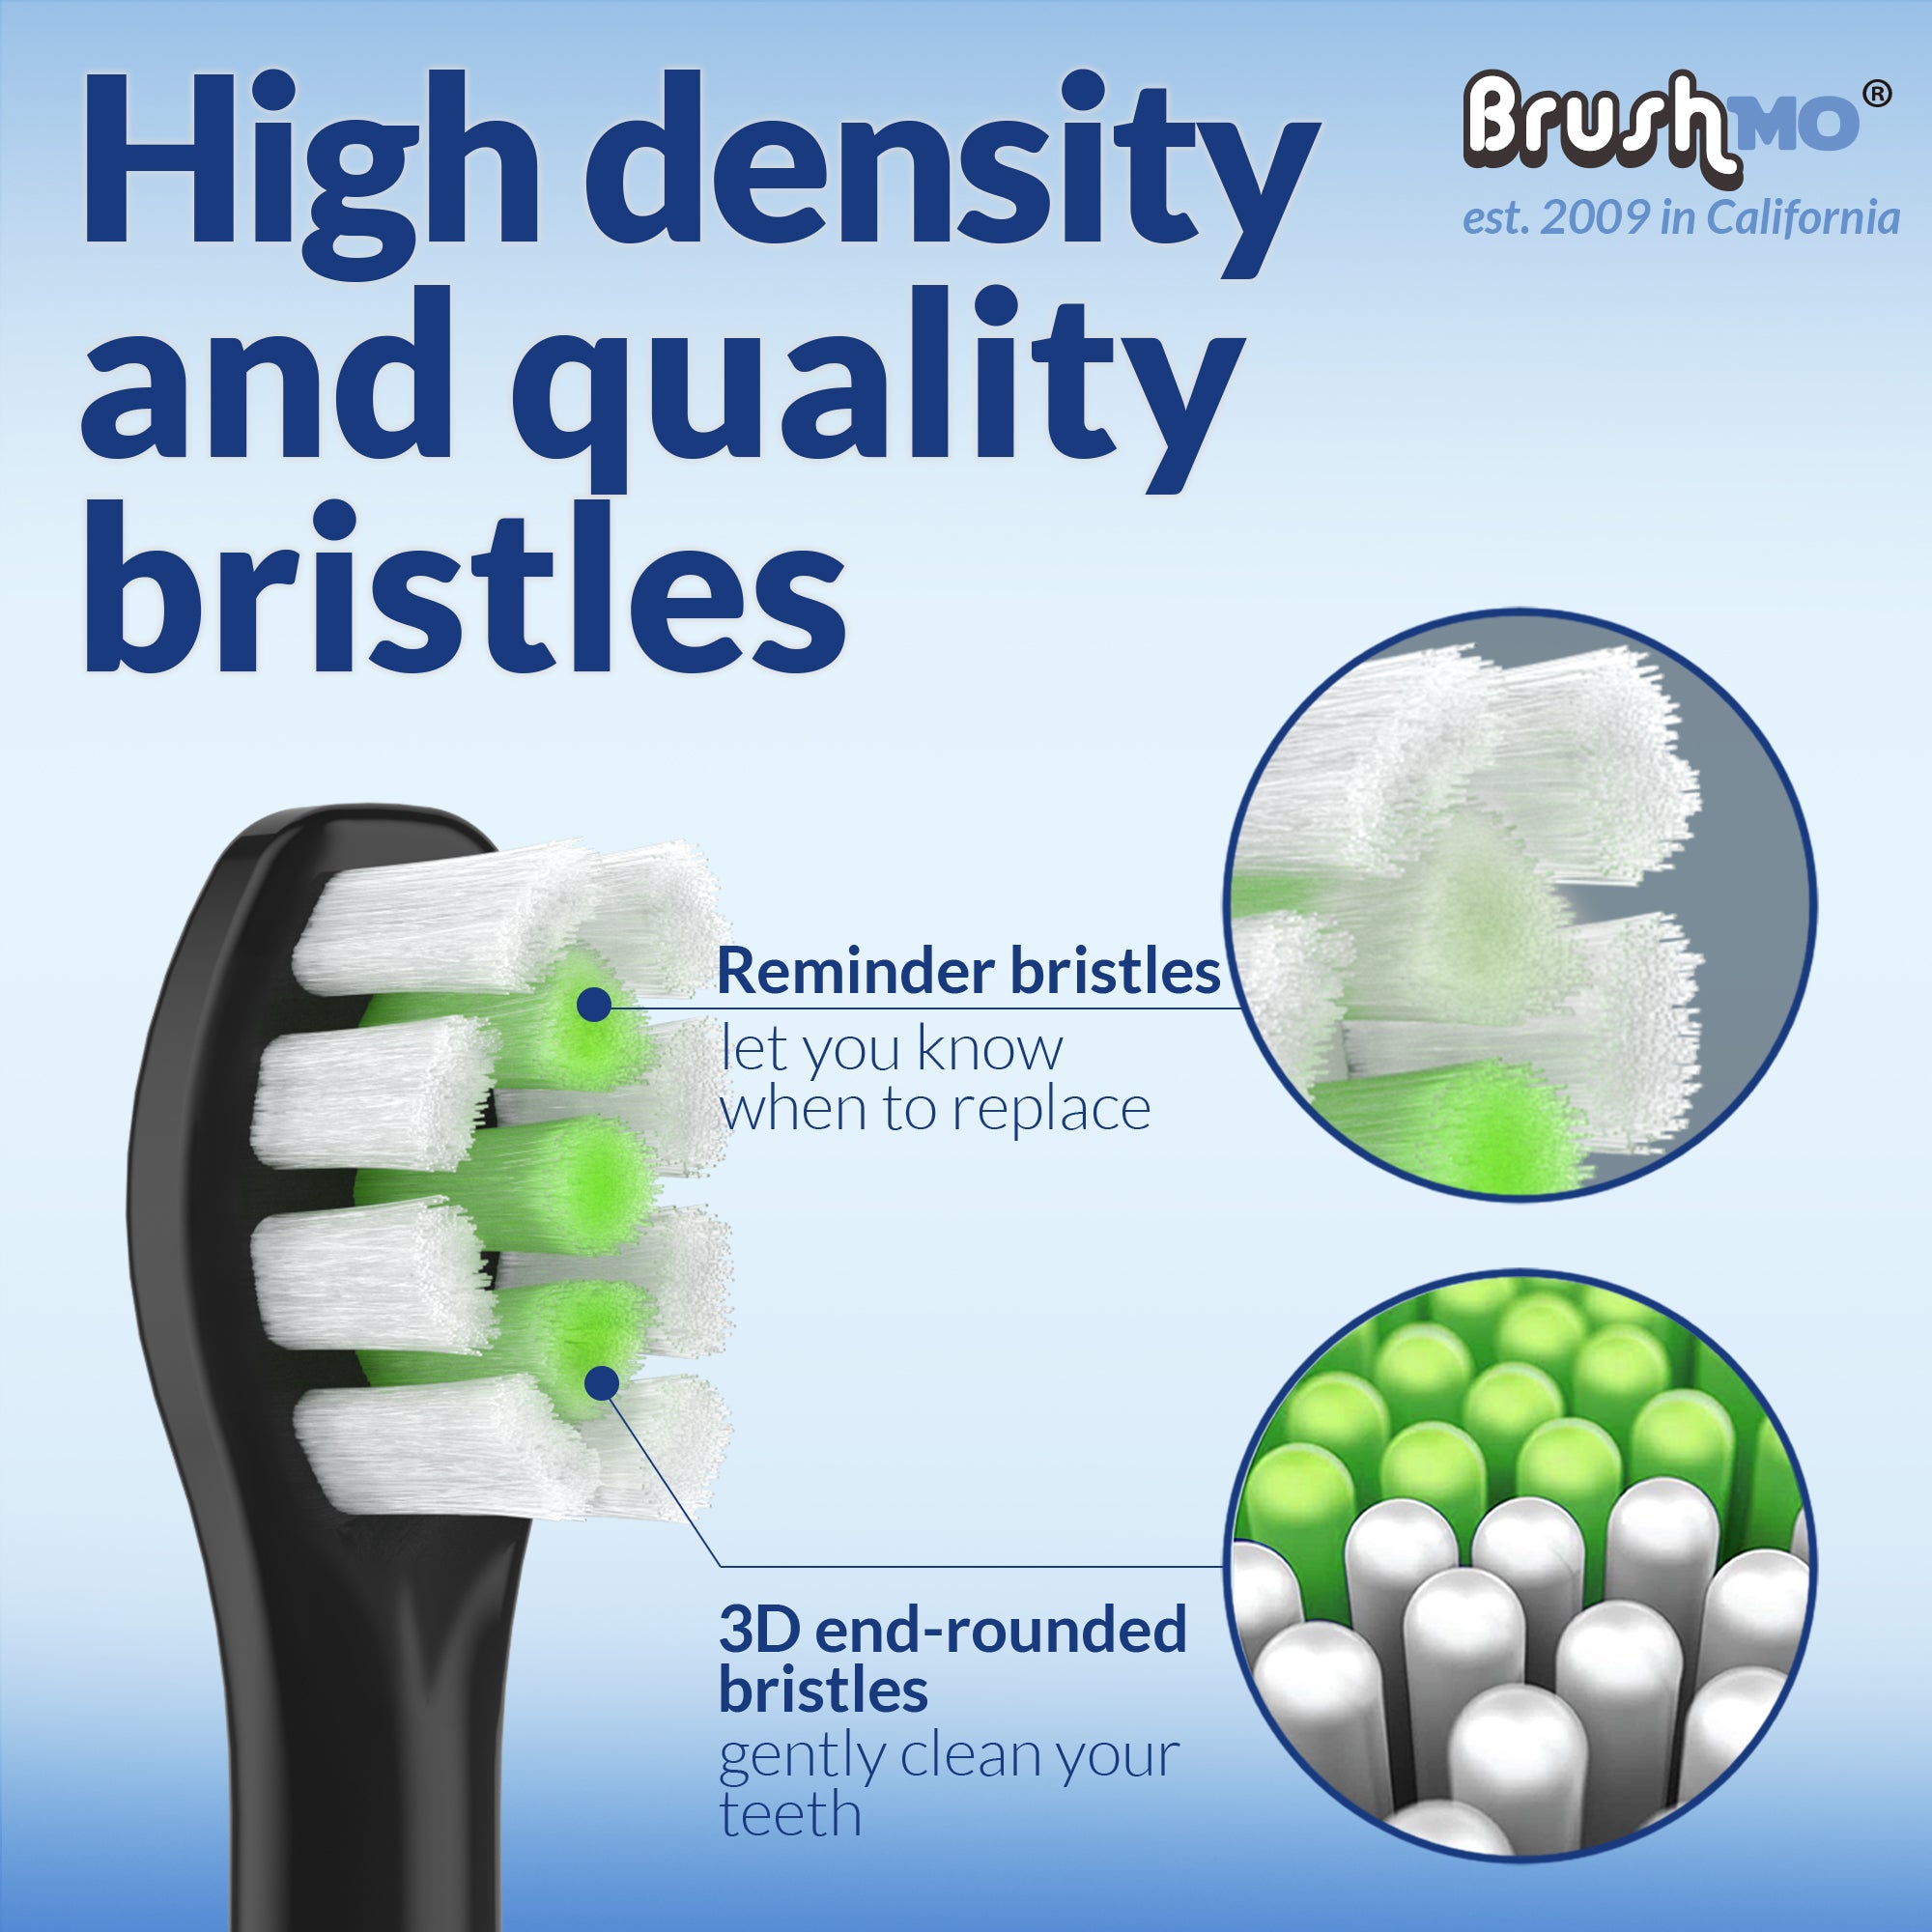 Replacement toothbrush heads for Philips Sonicare DiamondClean HX6072, Black, 8 pack compact